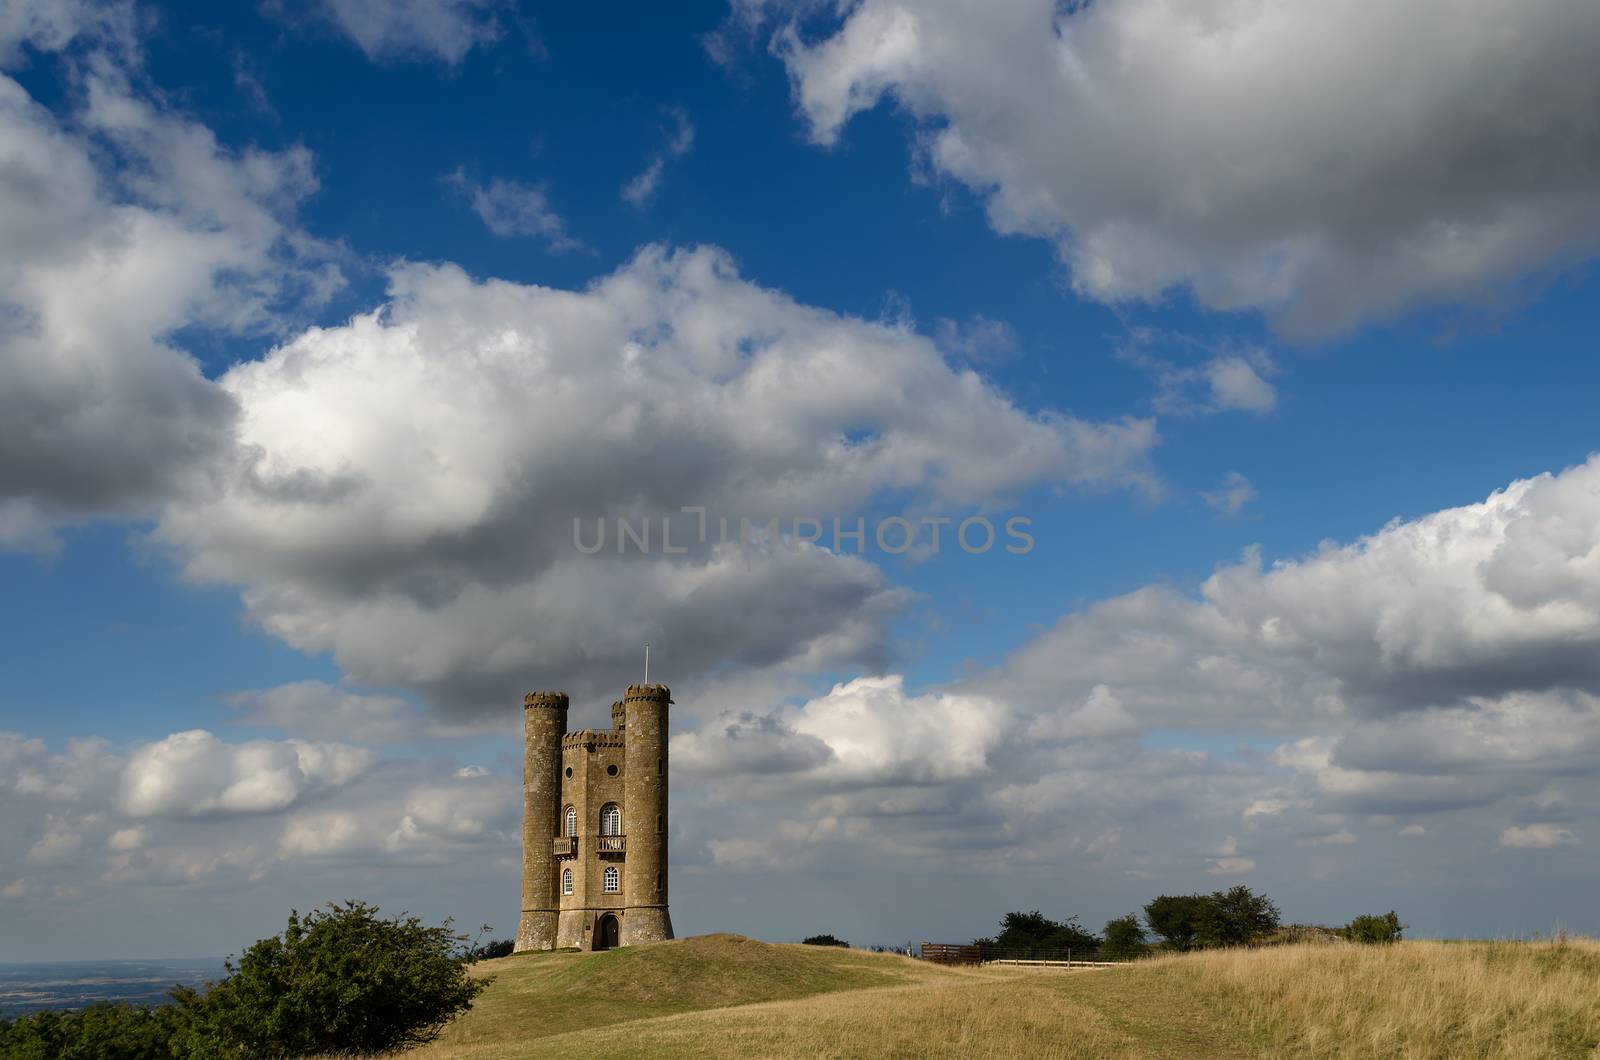 Clouds in the sky over Broadway Tower on a hill in the Cotswolds in England, UK.